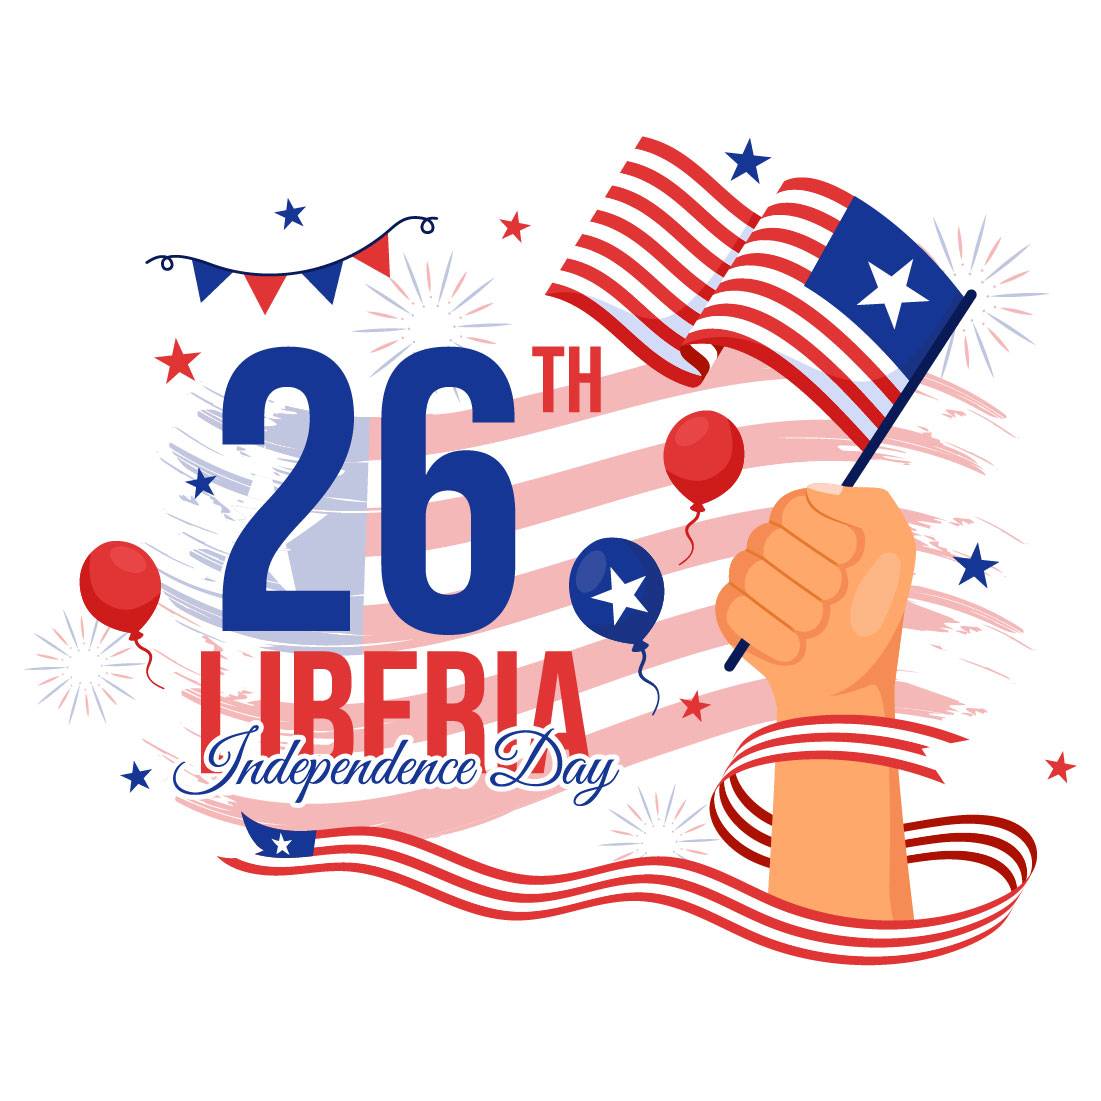 12 Liberia Independence Day Illustration preview image.